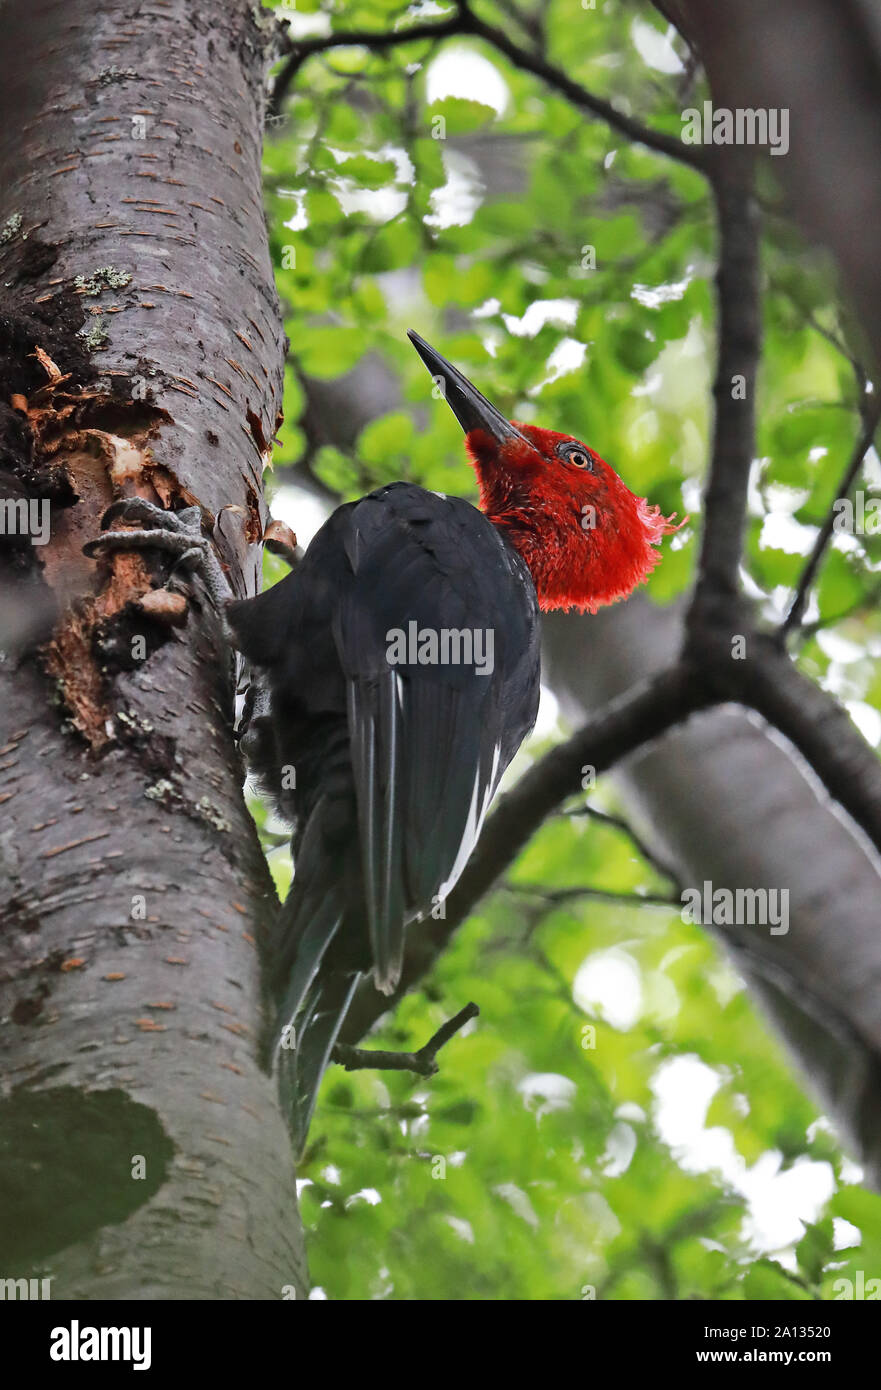 Magellanic Woodpecker (Campephilus magellanicus) adult male clinging to tree  Punta Arenas, Chile                       January Stock Photo